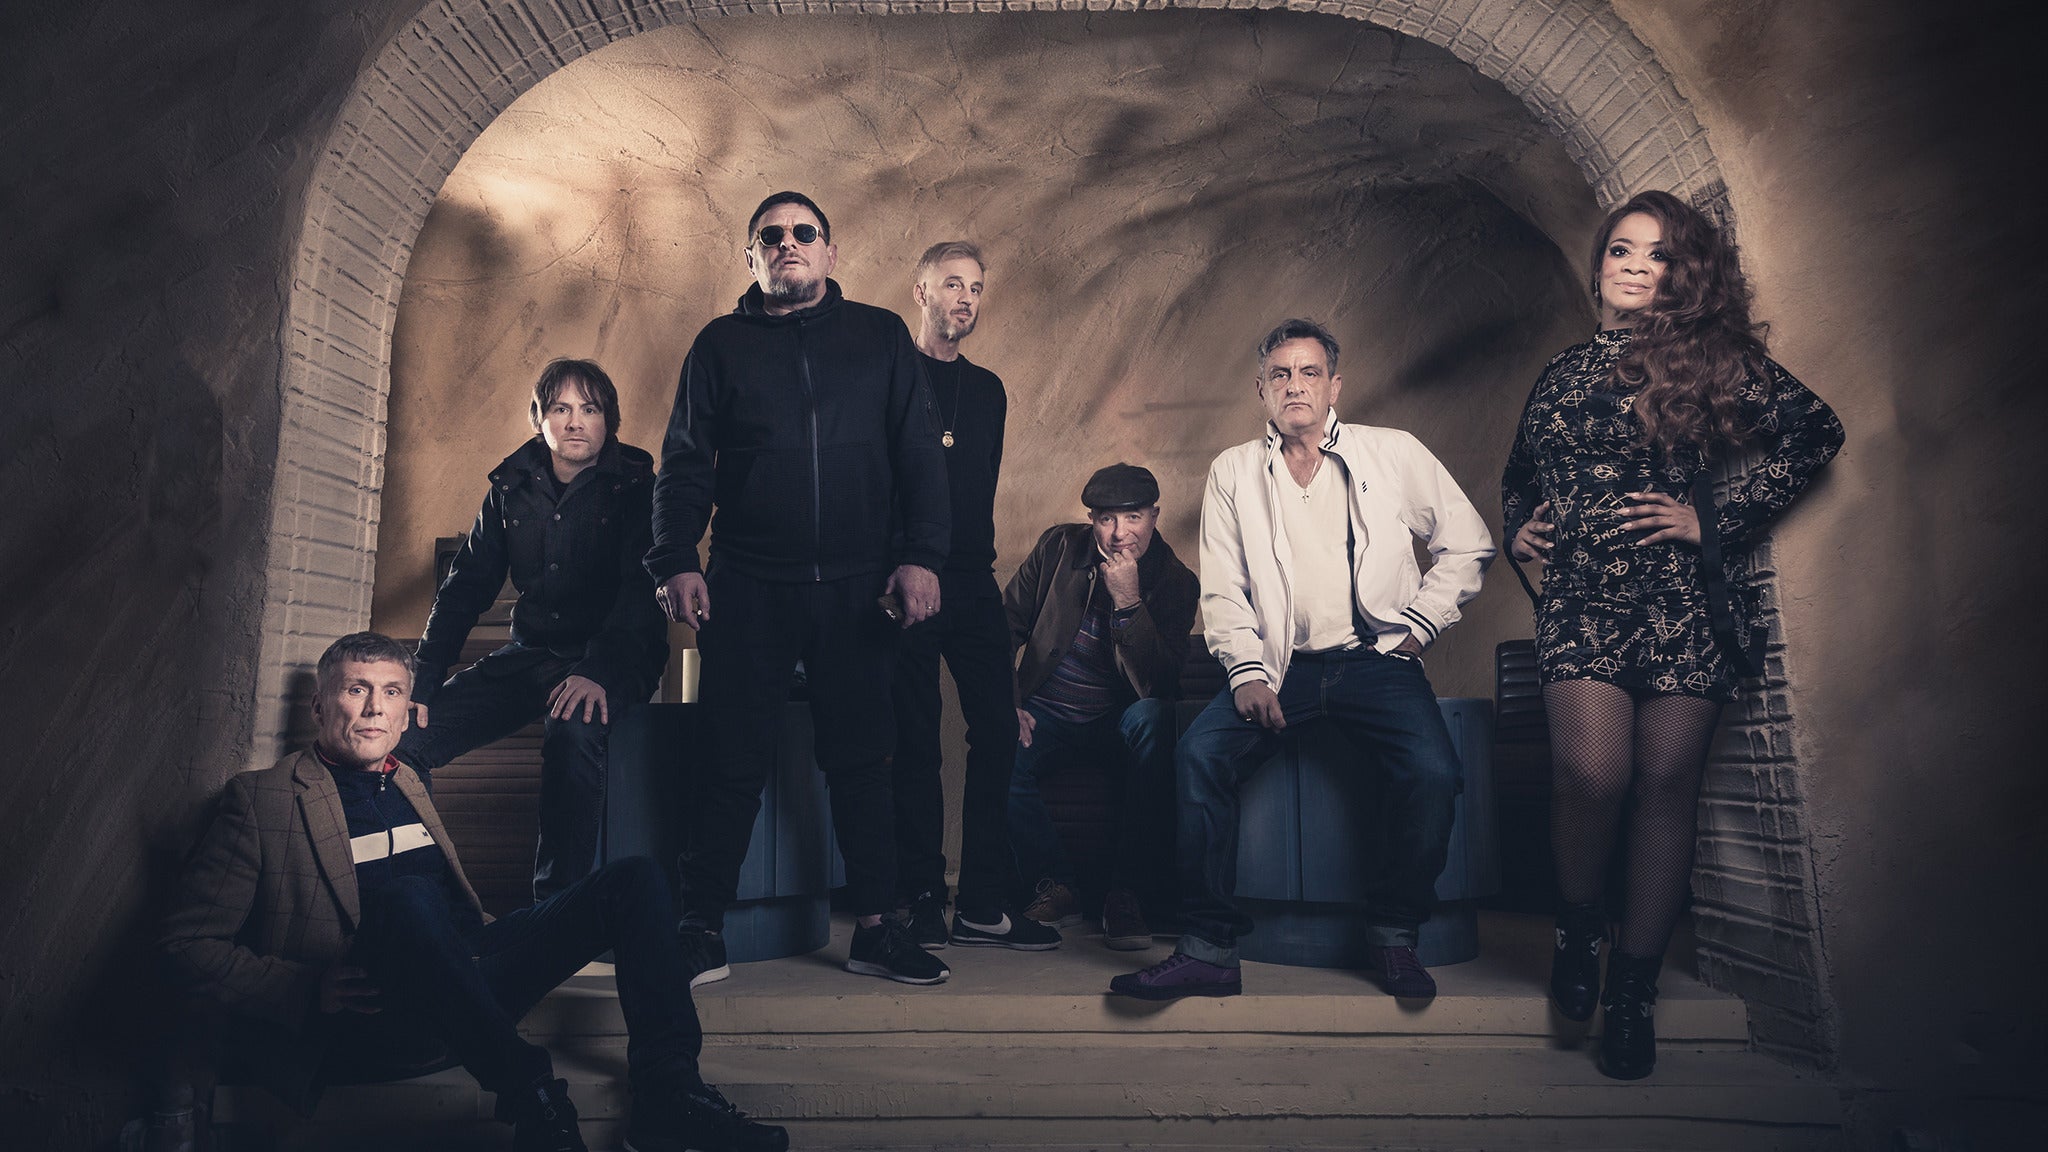 Image used with permission from Ticketmaster | Happy Mondays tickets